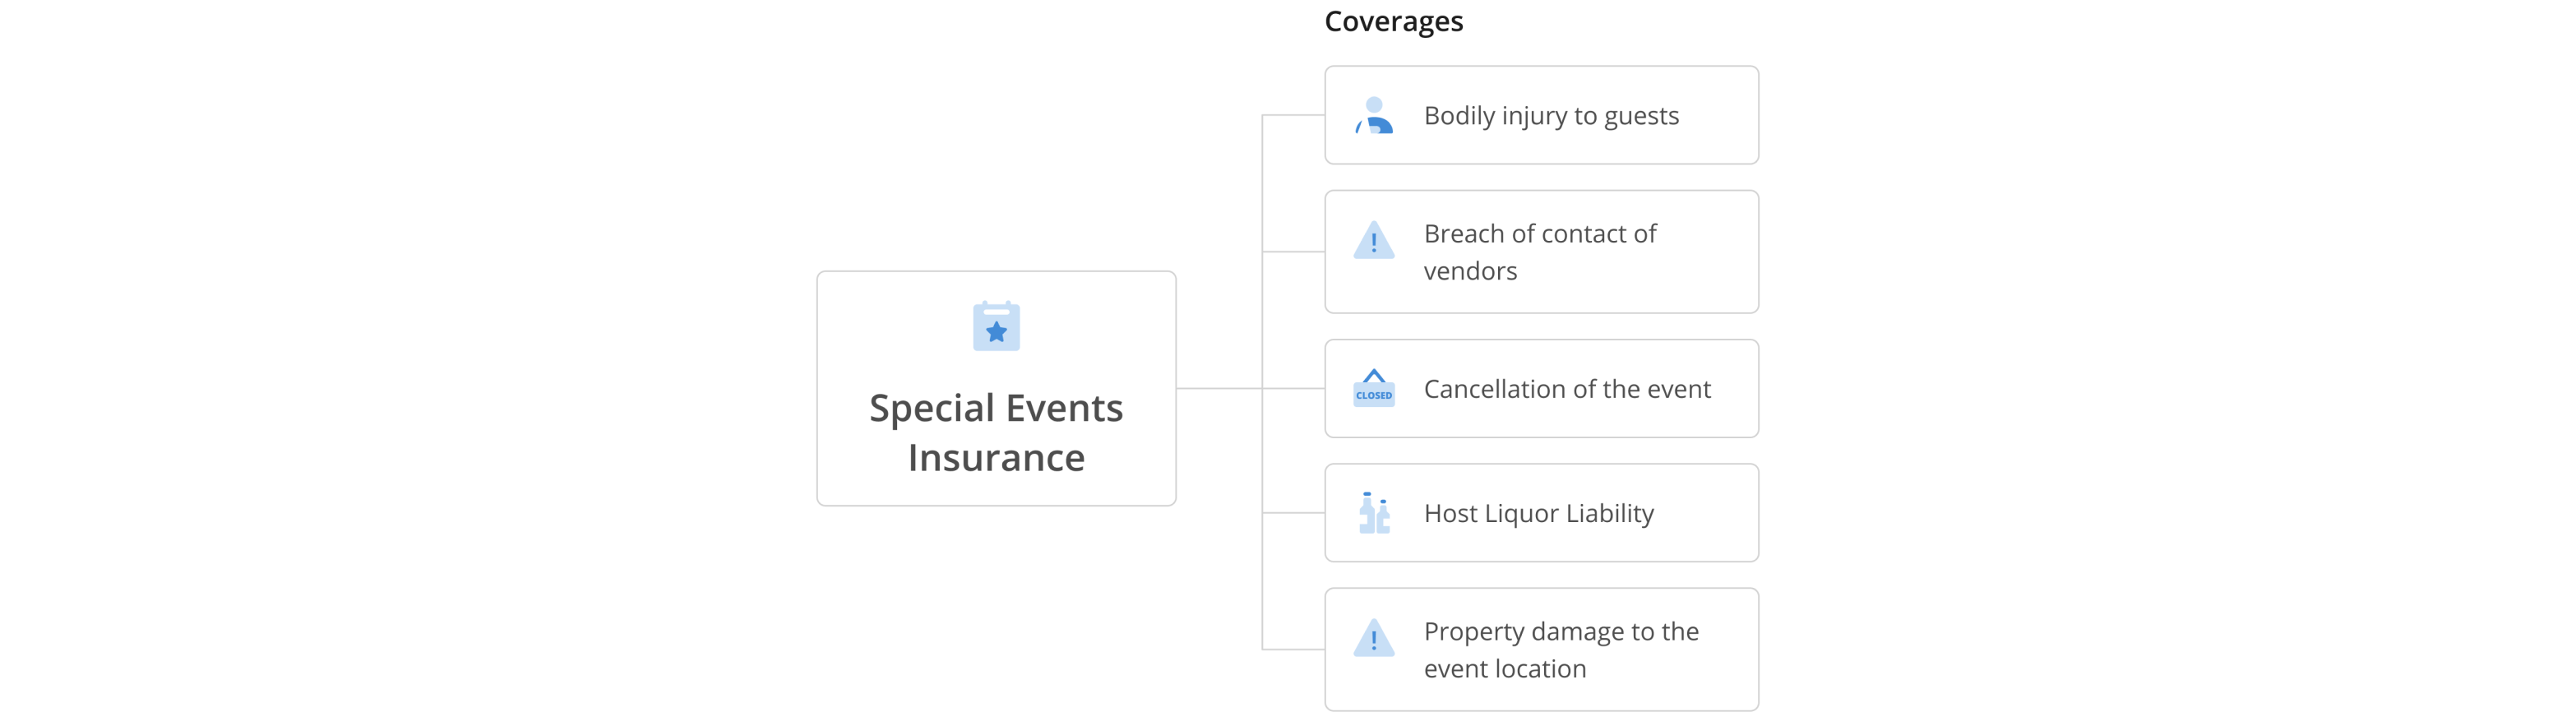 NEW - DESKTOP - Infographic - Special Events Insurance@2x